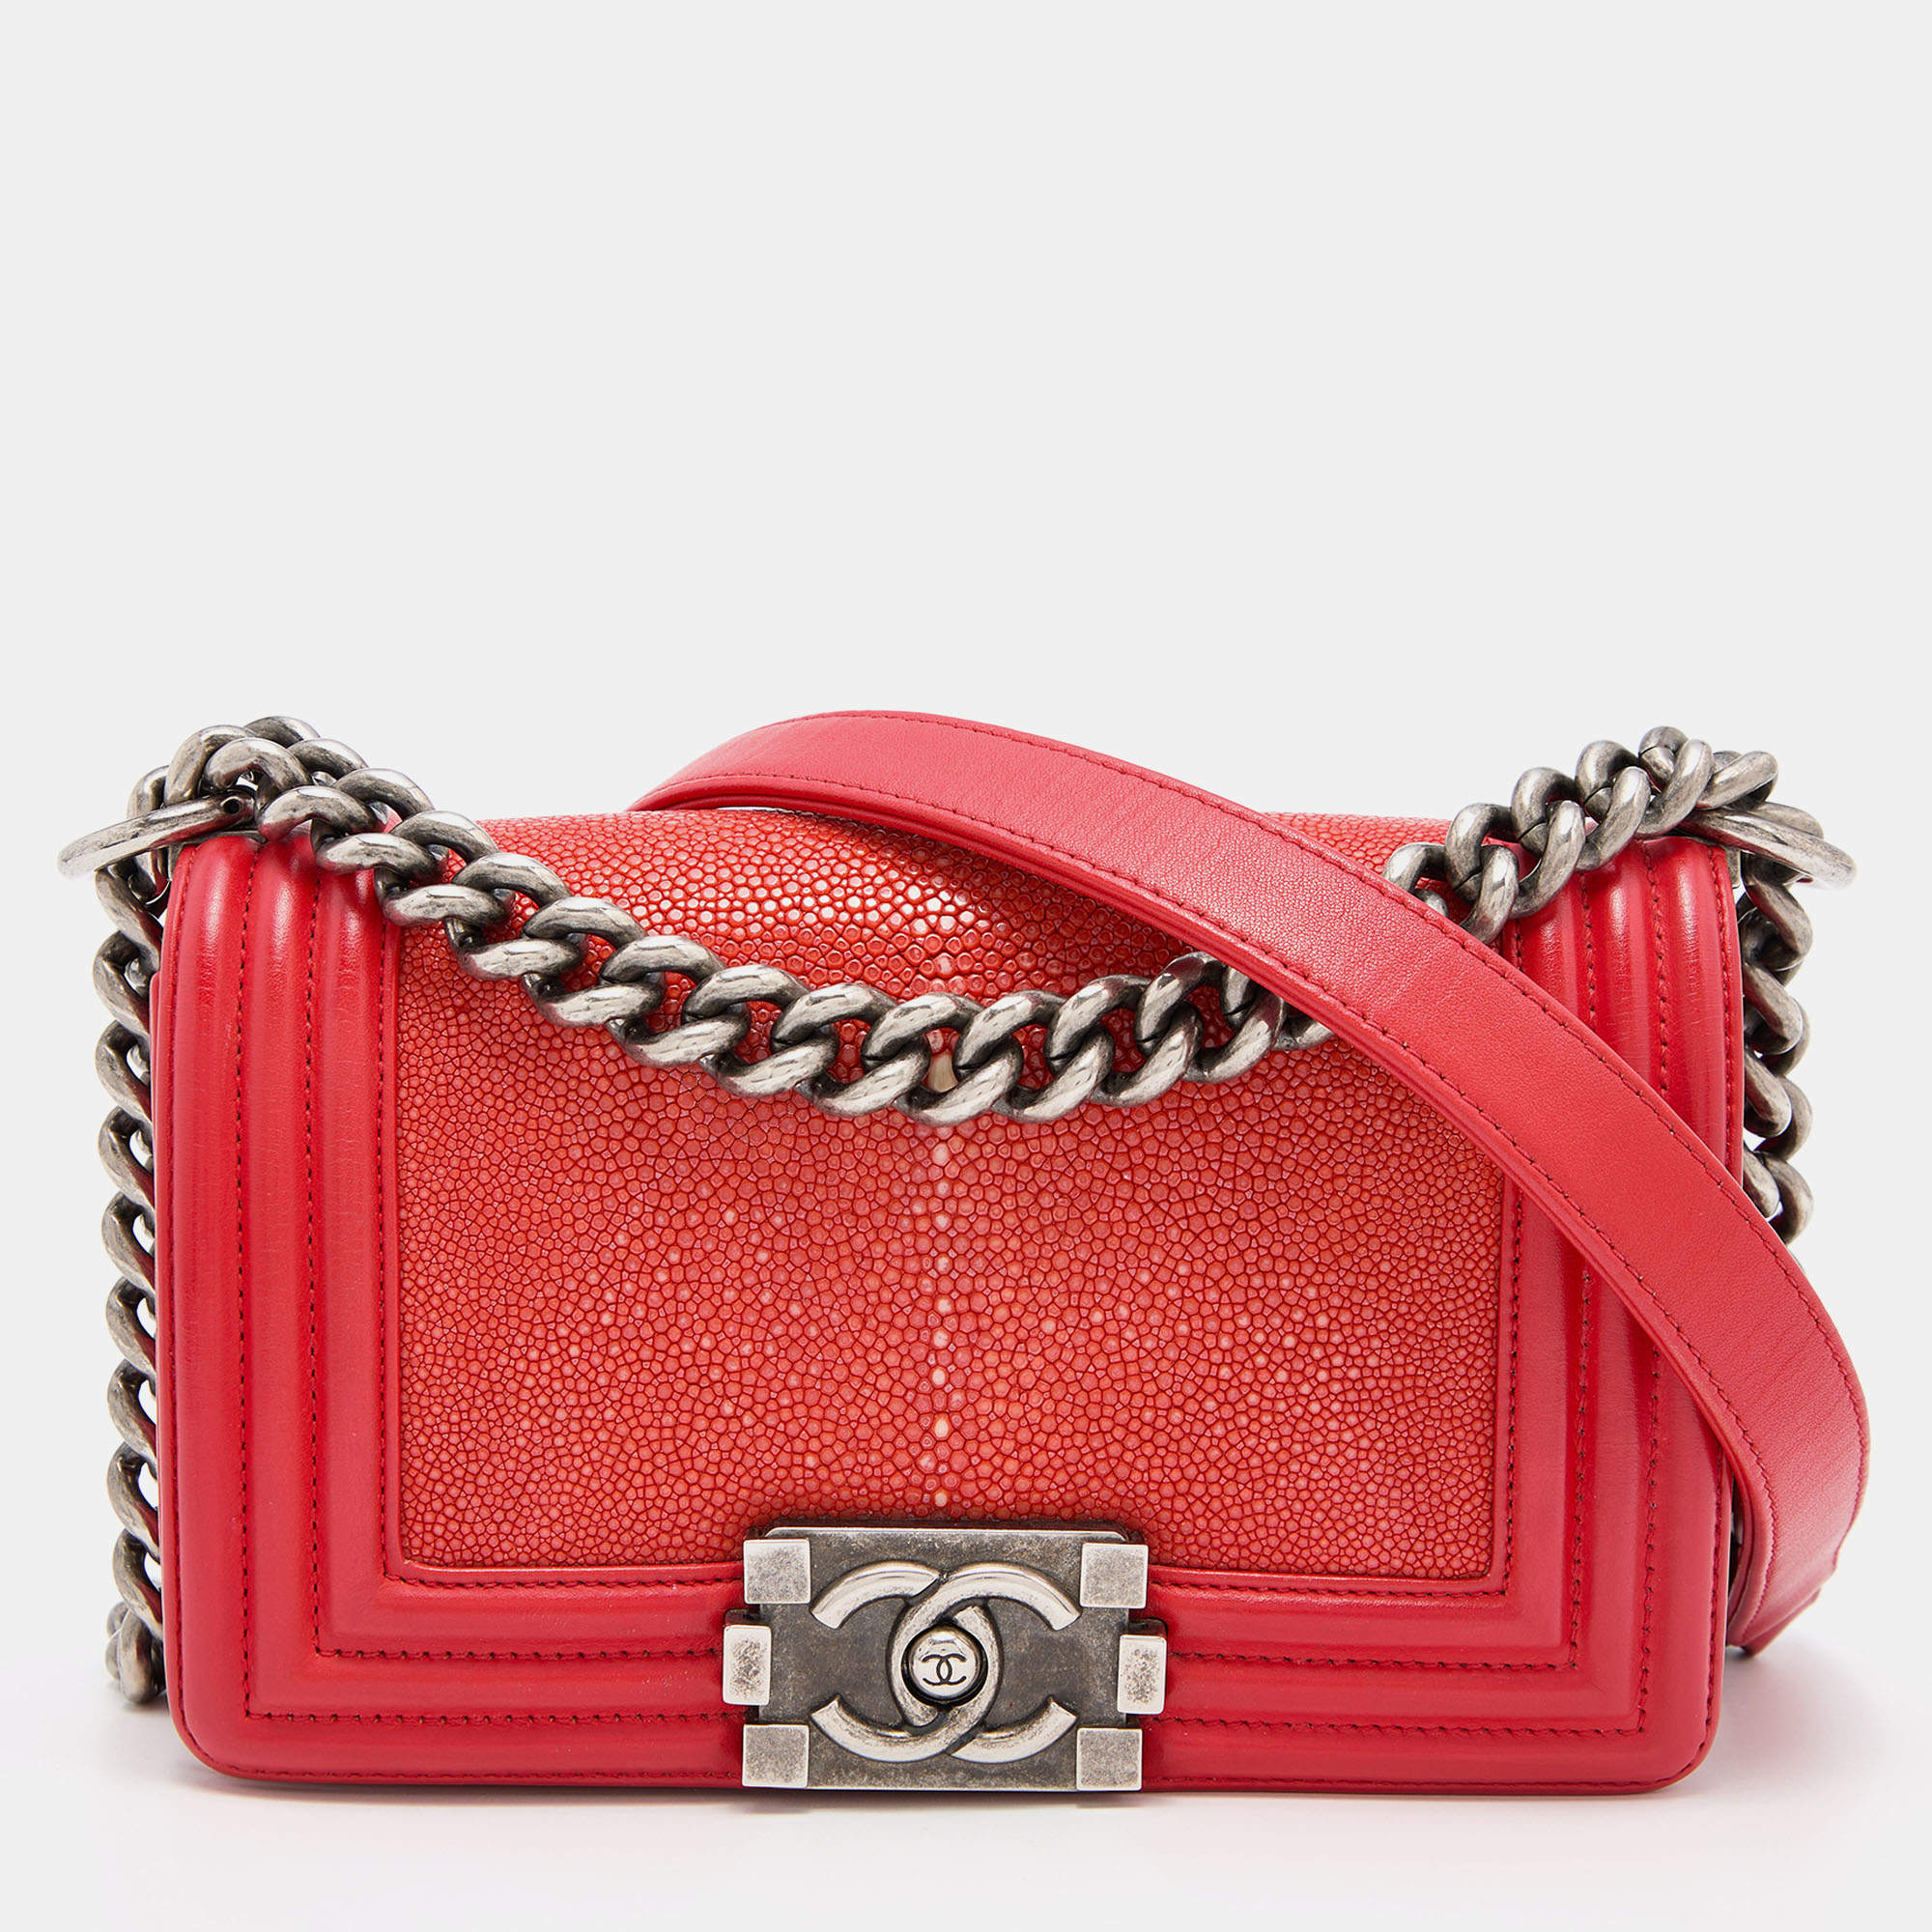 Chanel Red Stingray and Leather Small Boy Flap Bag